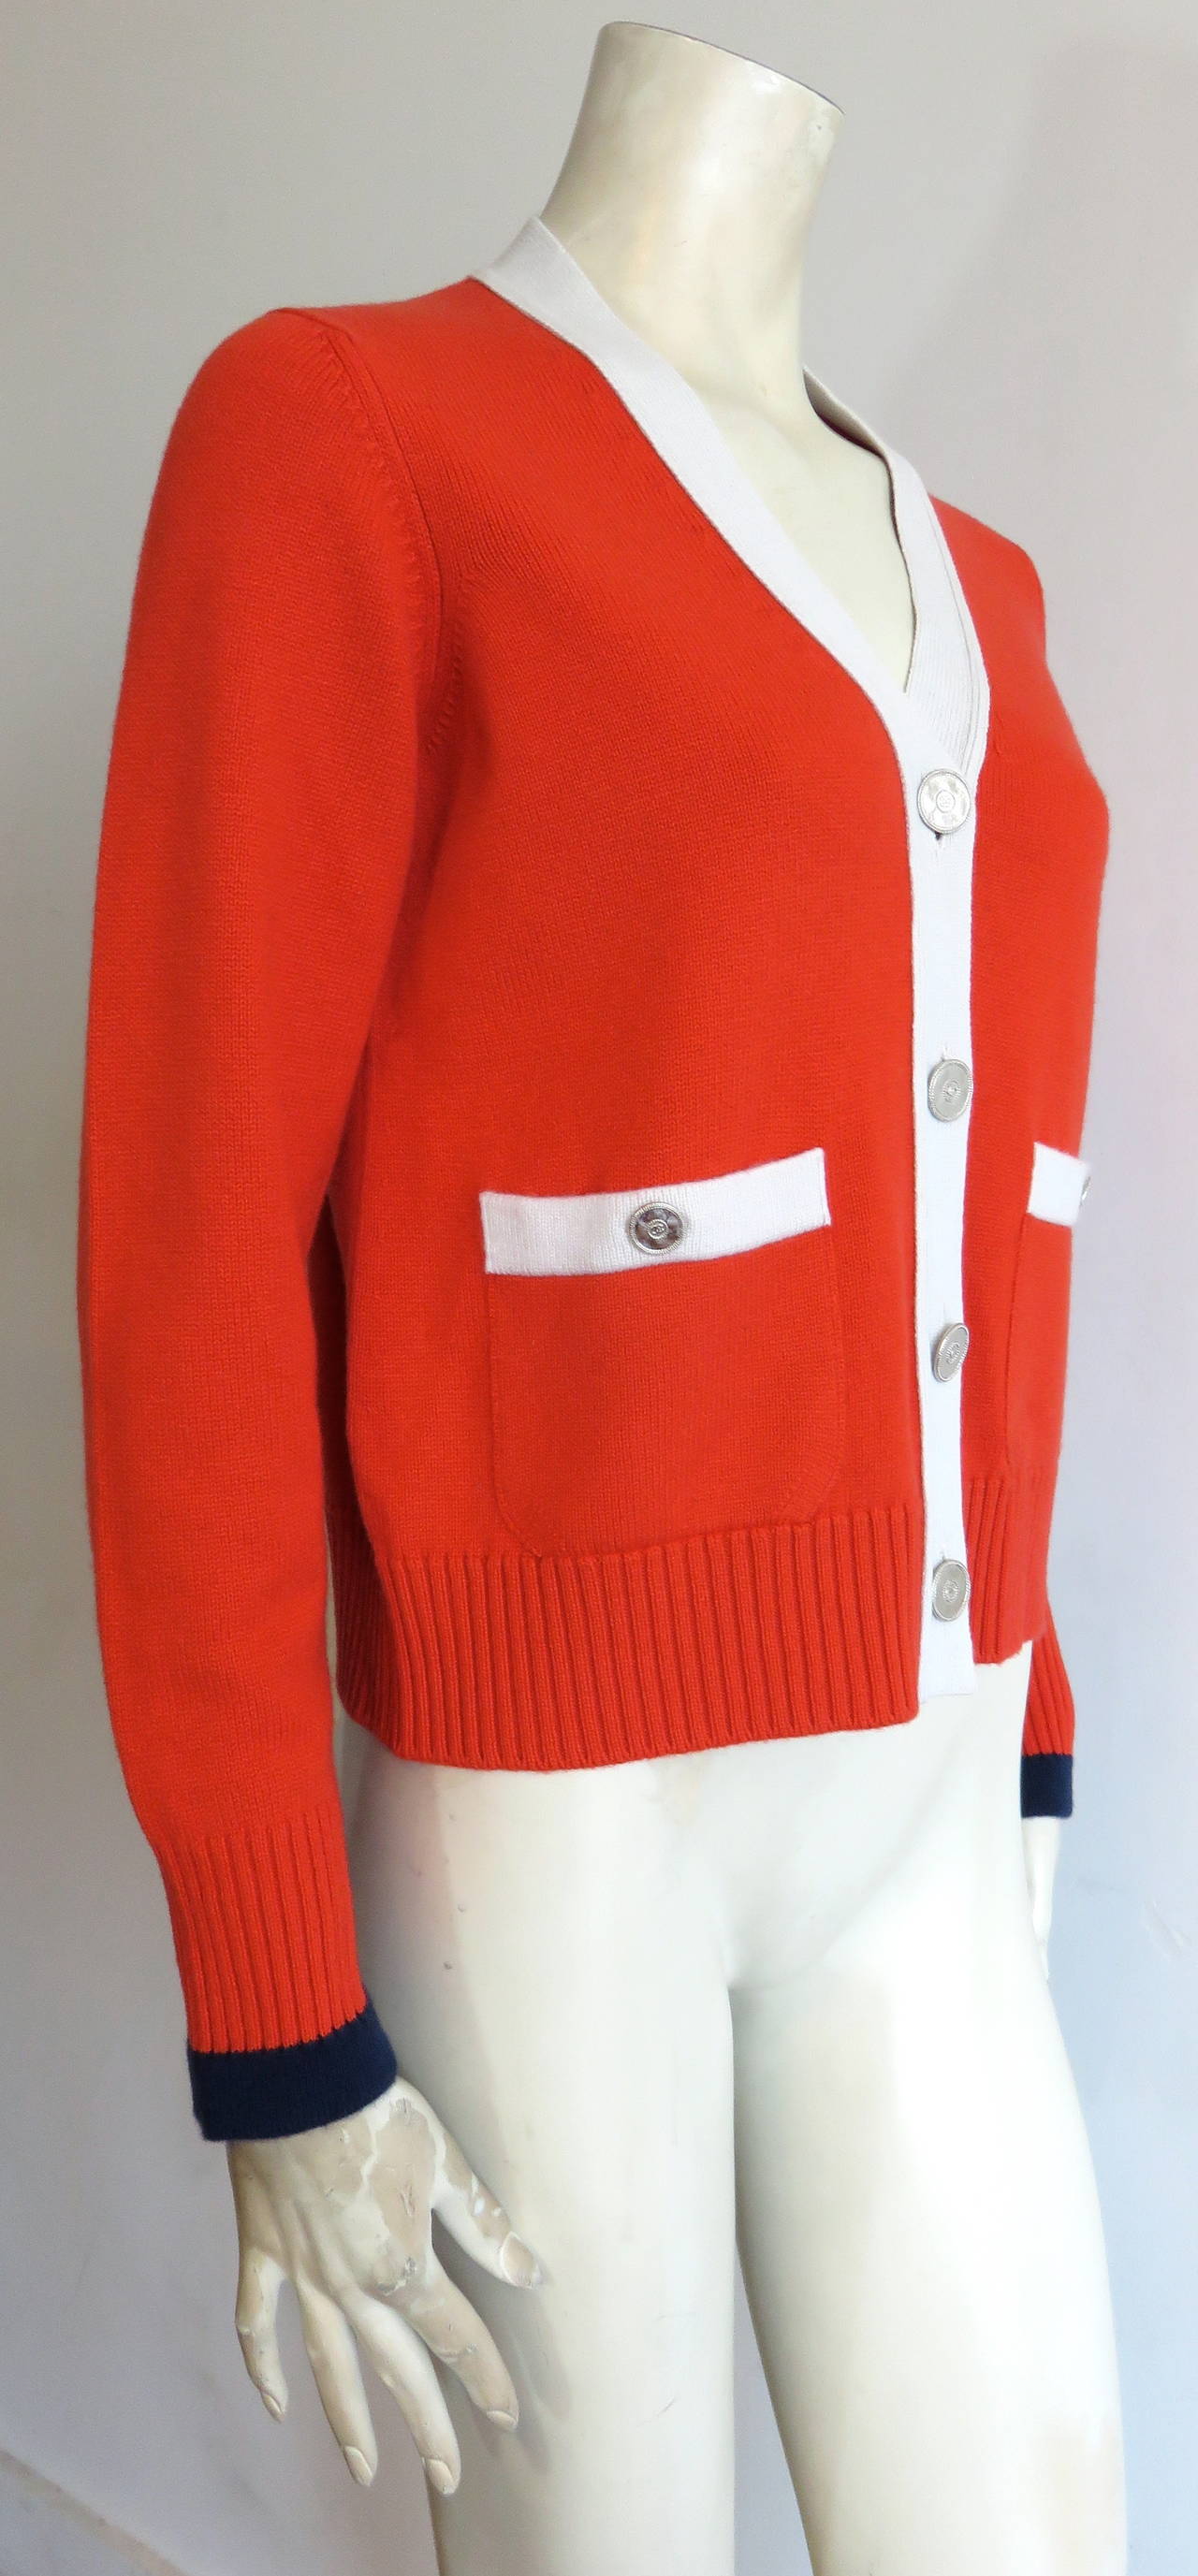 Recent, CHANEL PARIS, pure cashmere cardigan jacket with metal logo buttons.

In excellent condition.

Poppy red/orange ground with off-white placket, and pocket edges.  Navy tipping edge at sleeve edges.

Logo engraved, metal buttons with